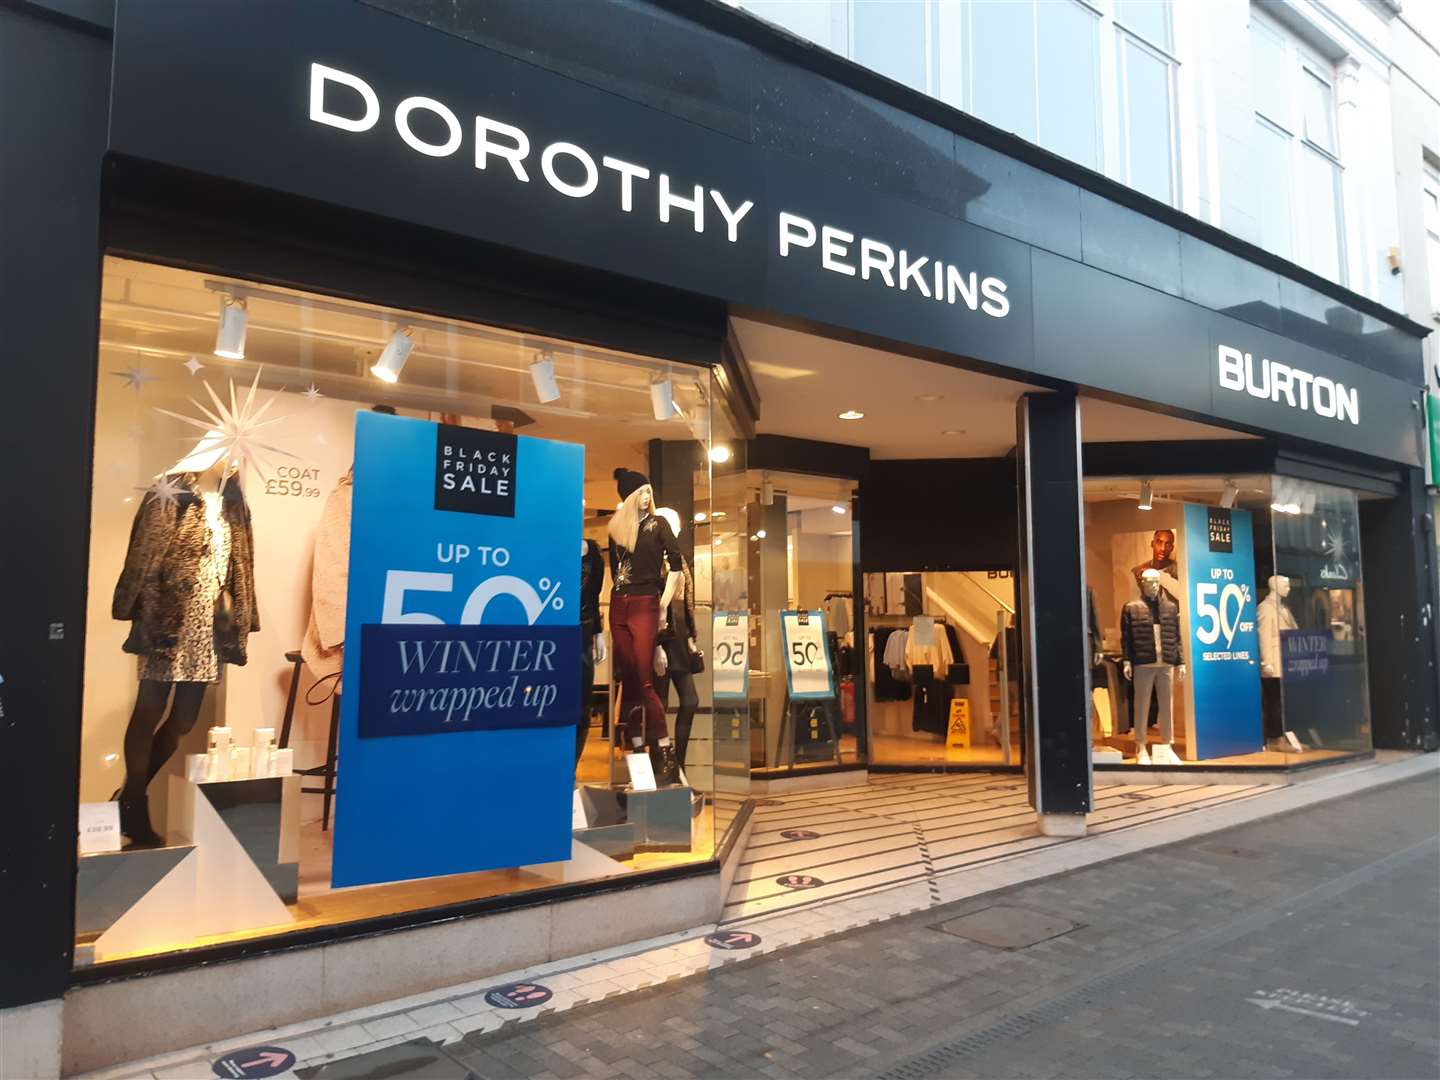 Arcadia Group stores Burton and Dorothy Perkins in Maidstone - all the brands' stores will now close